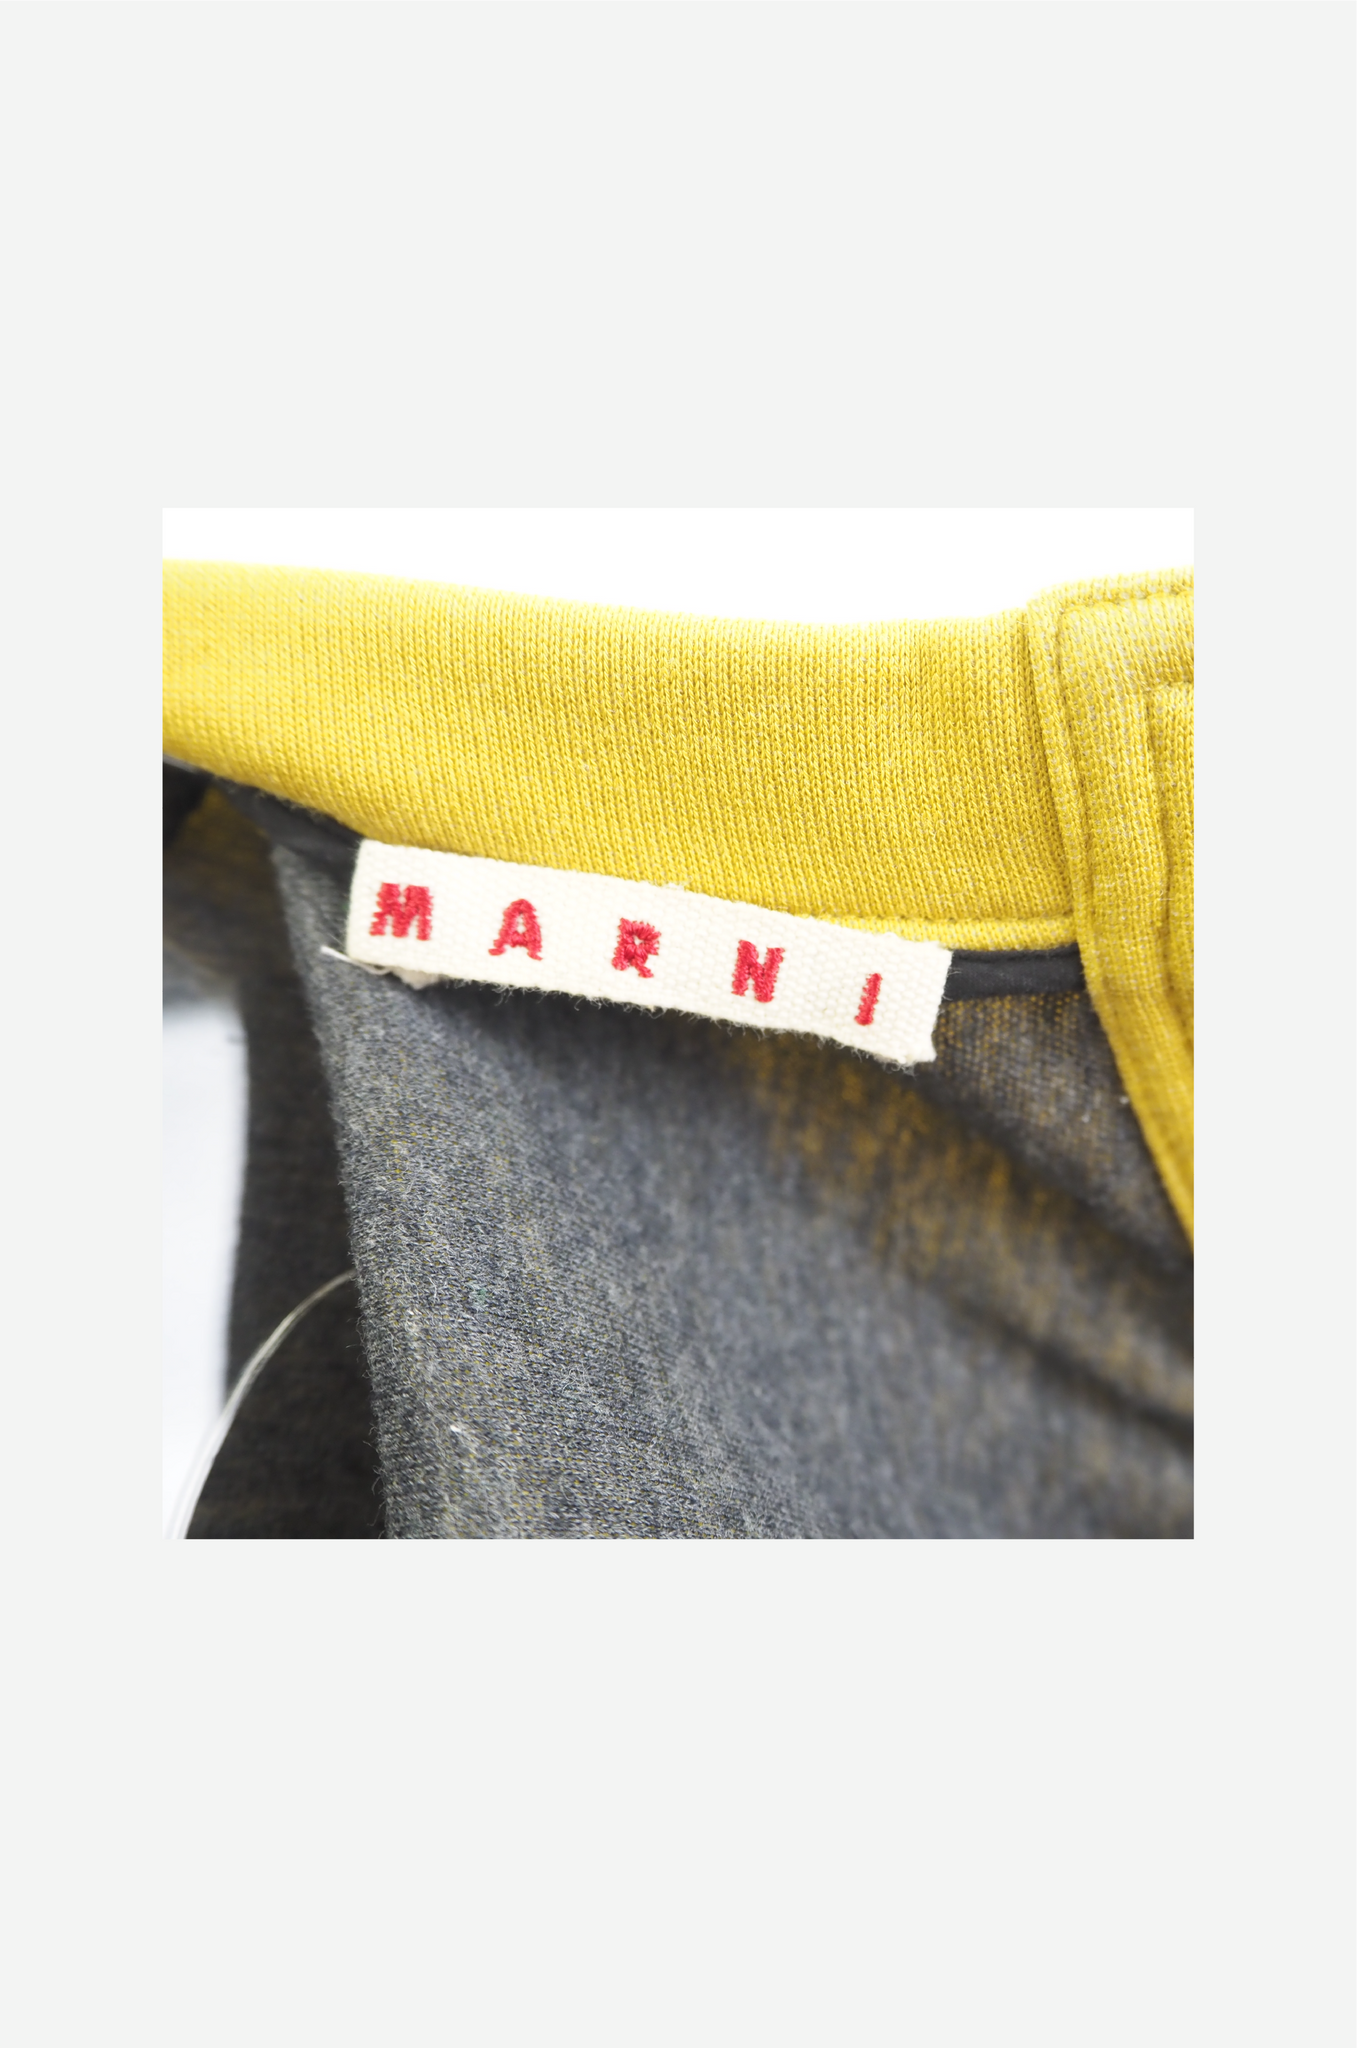 Archives Room: MARNI Top